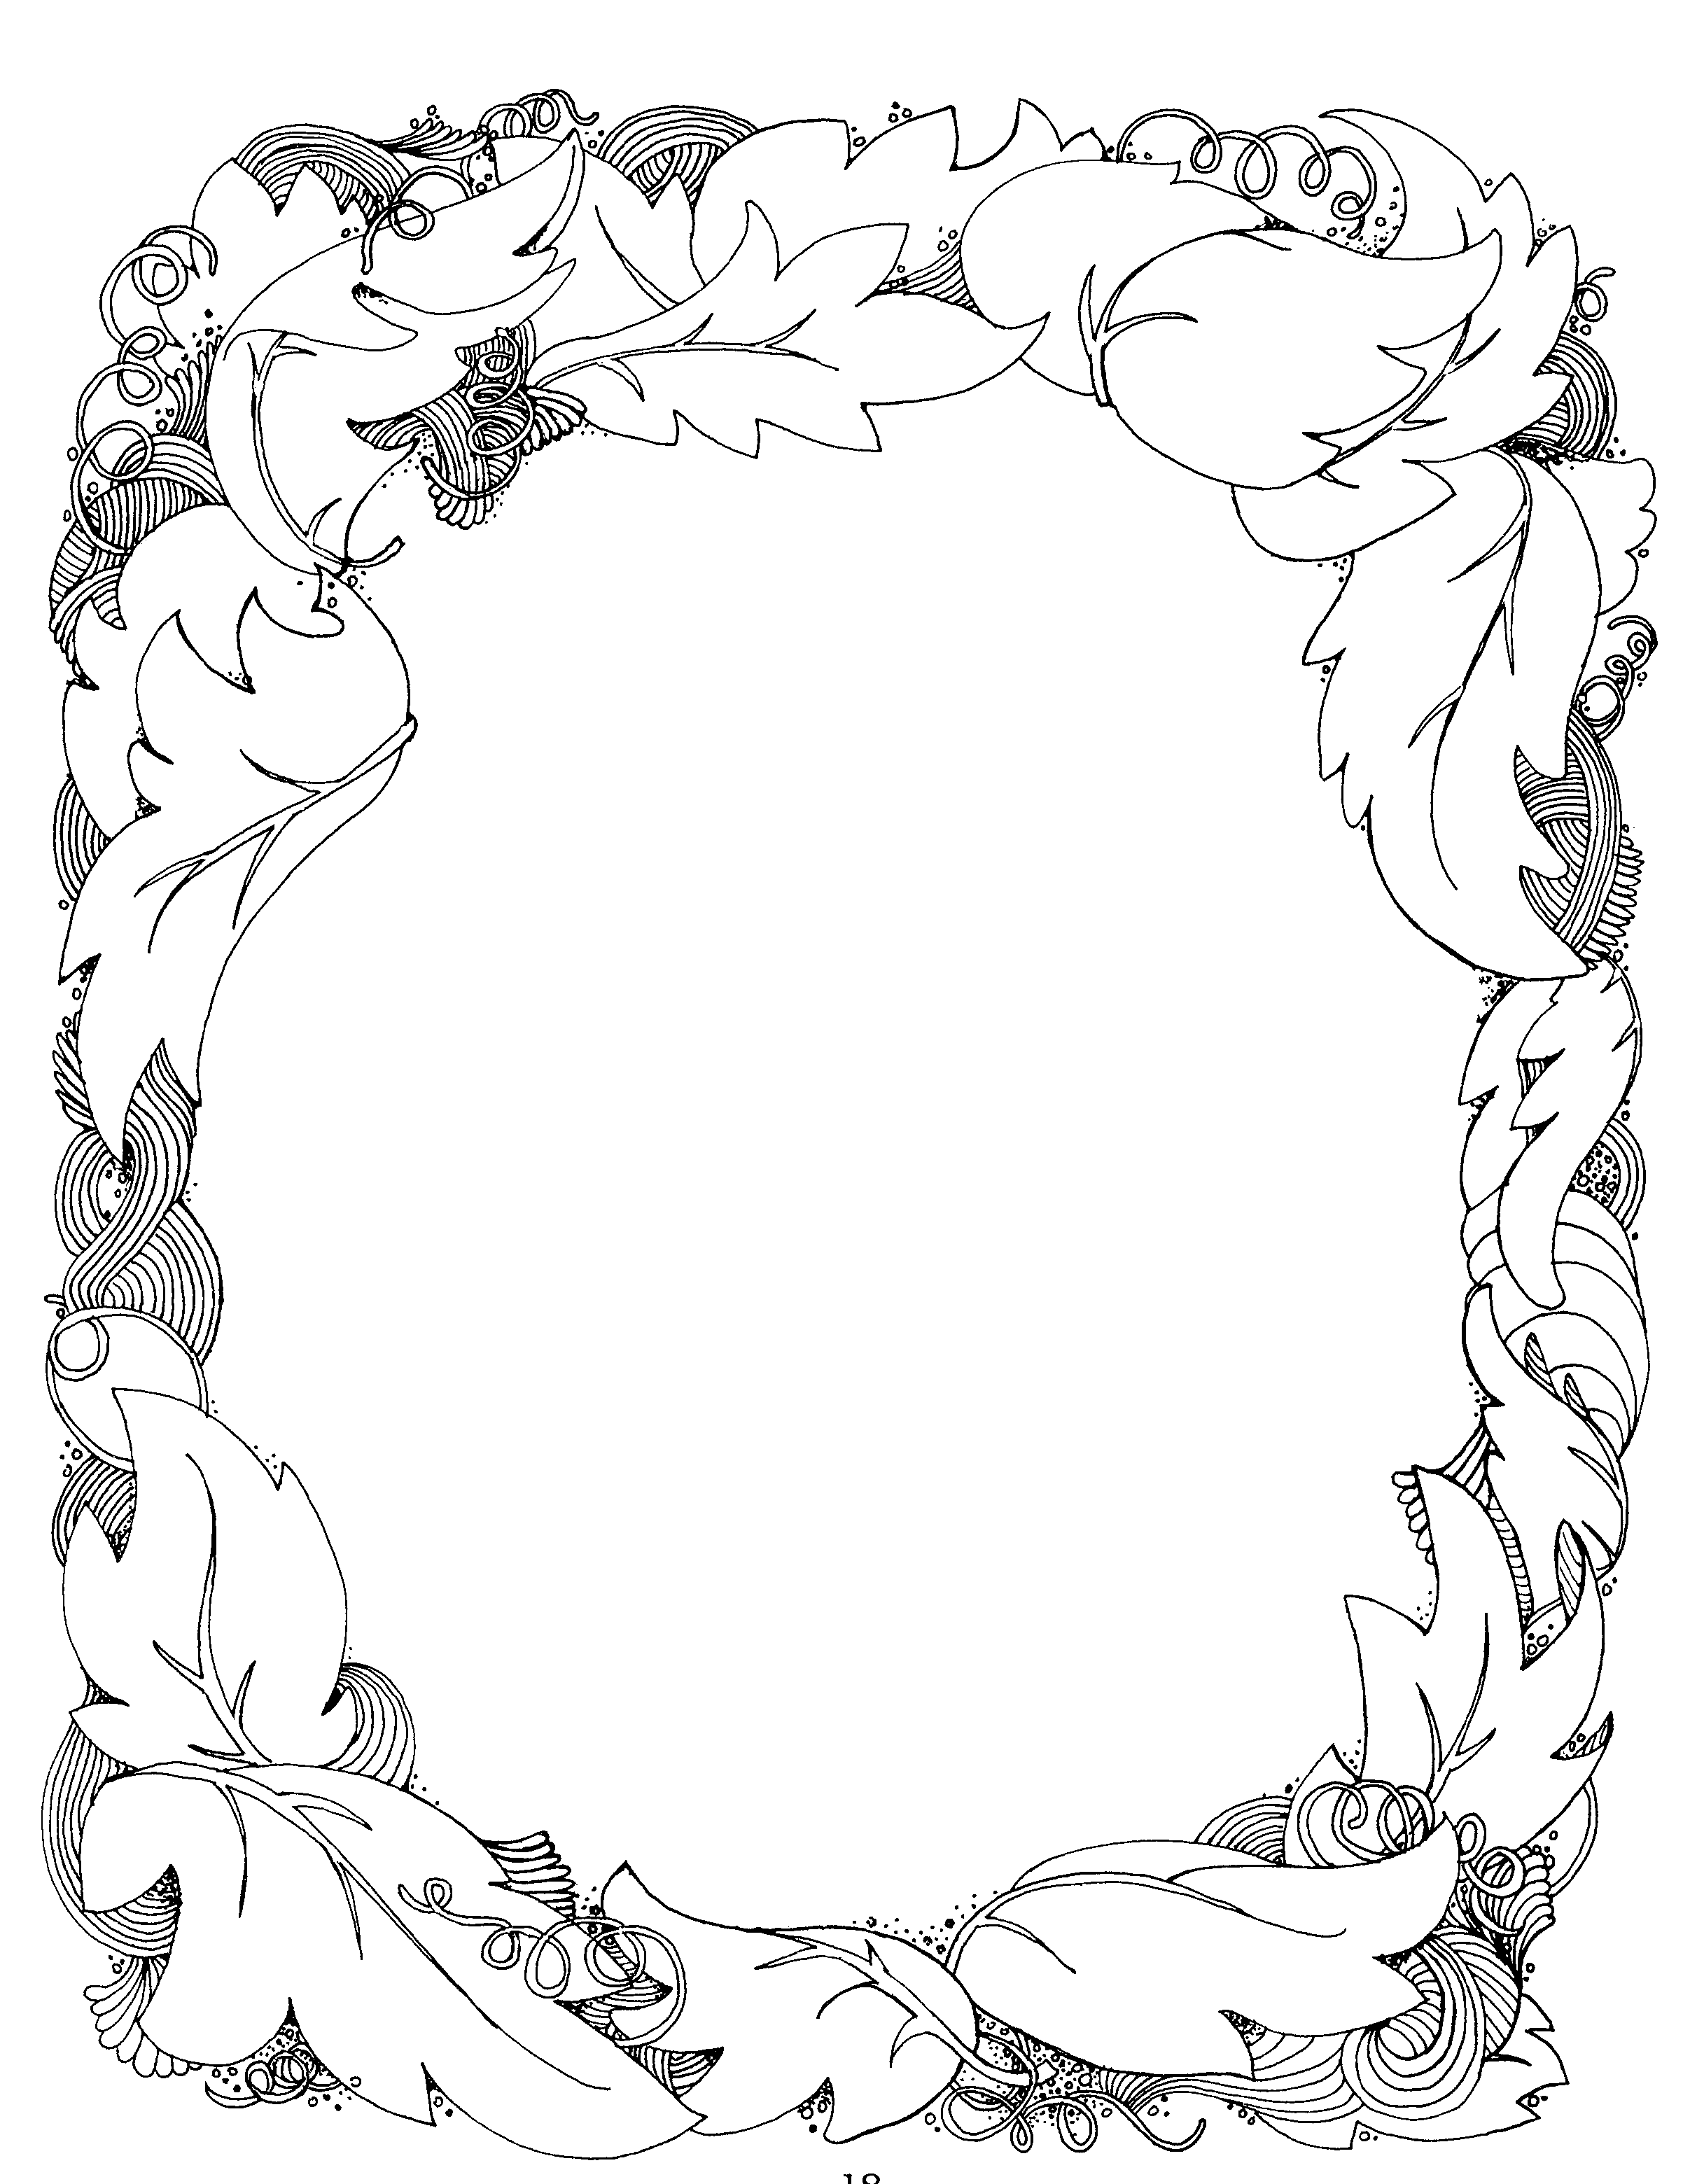 Black And White Christmas Borders - Cliparts.co